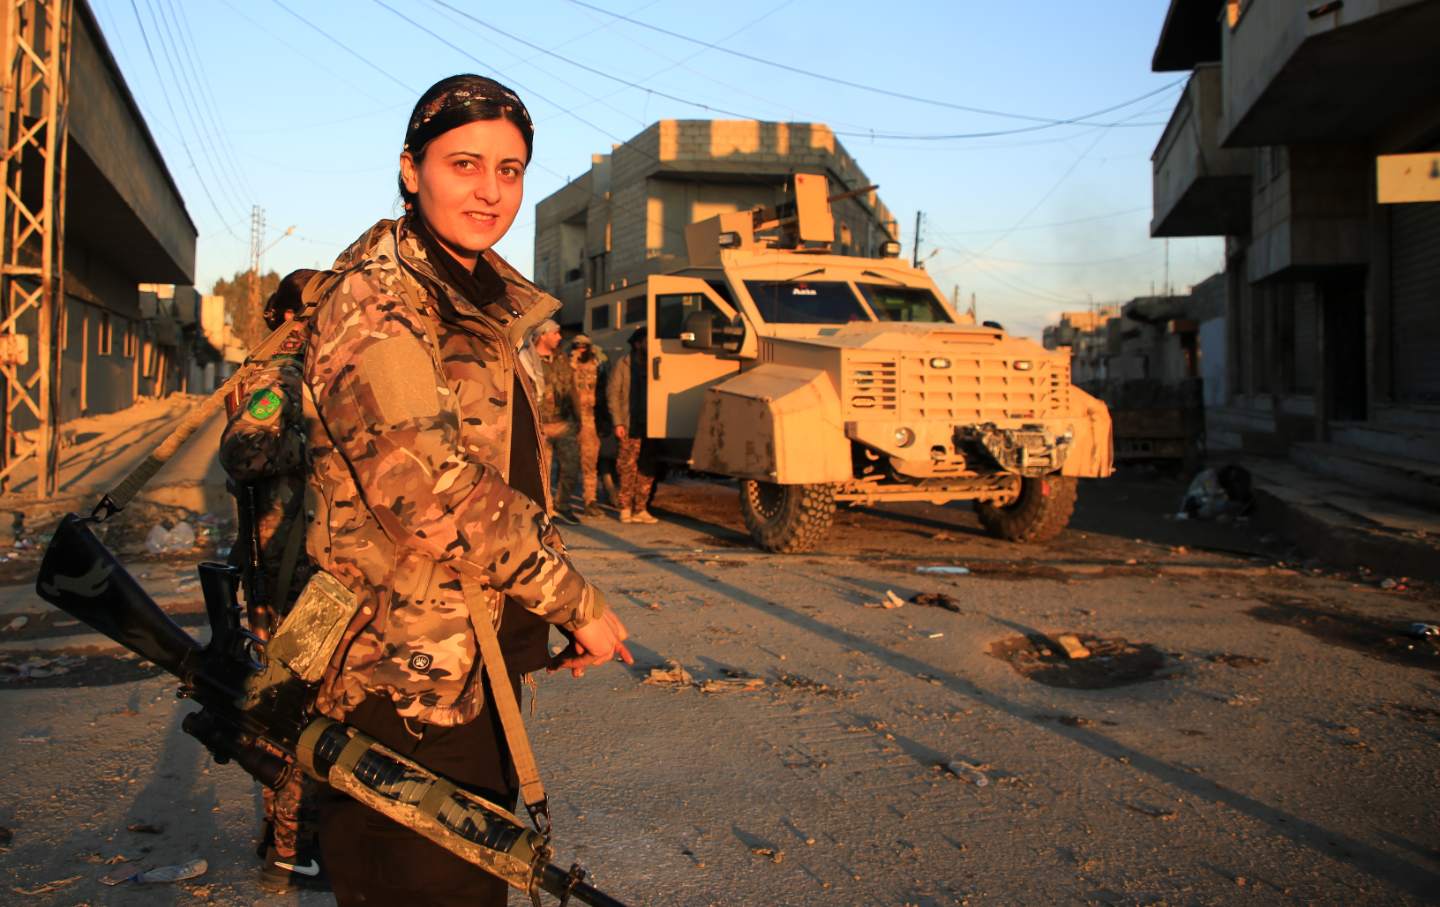 A female soldier looks toward the camera, carrying a gun strapped to her shoulder. Other soldiers behind her congregate around an armored vehicle.